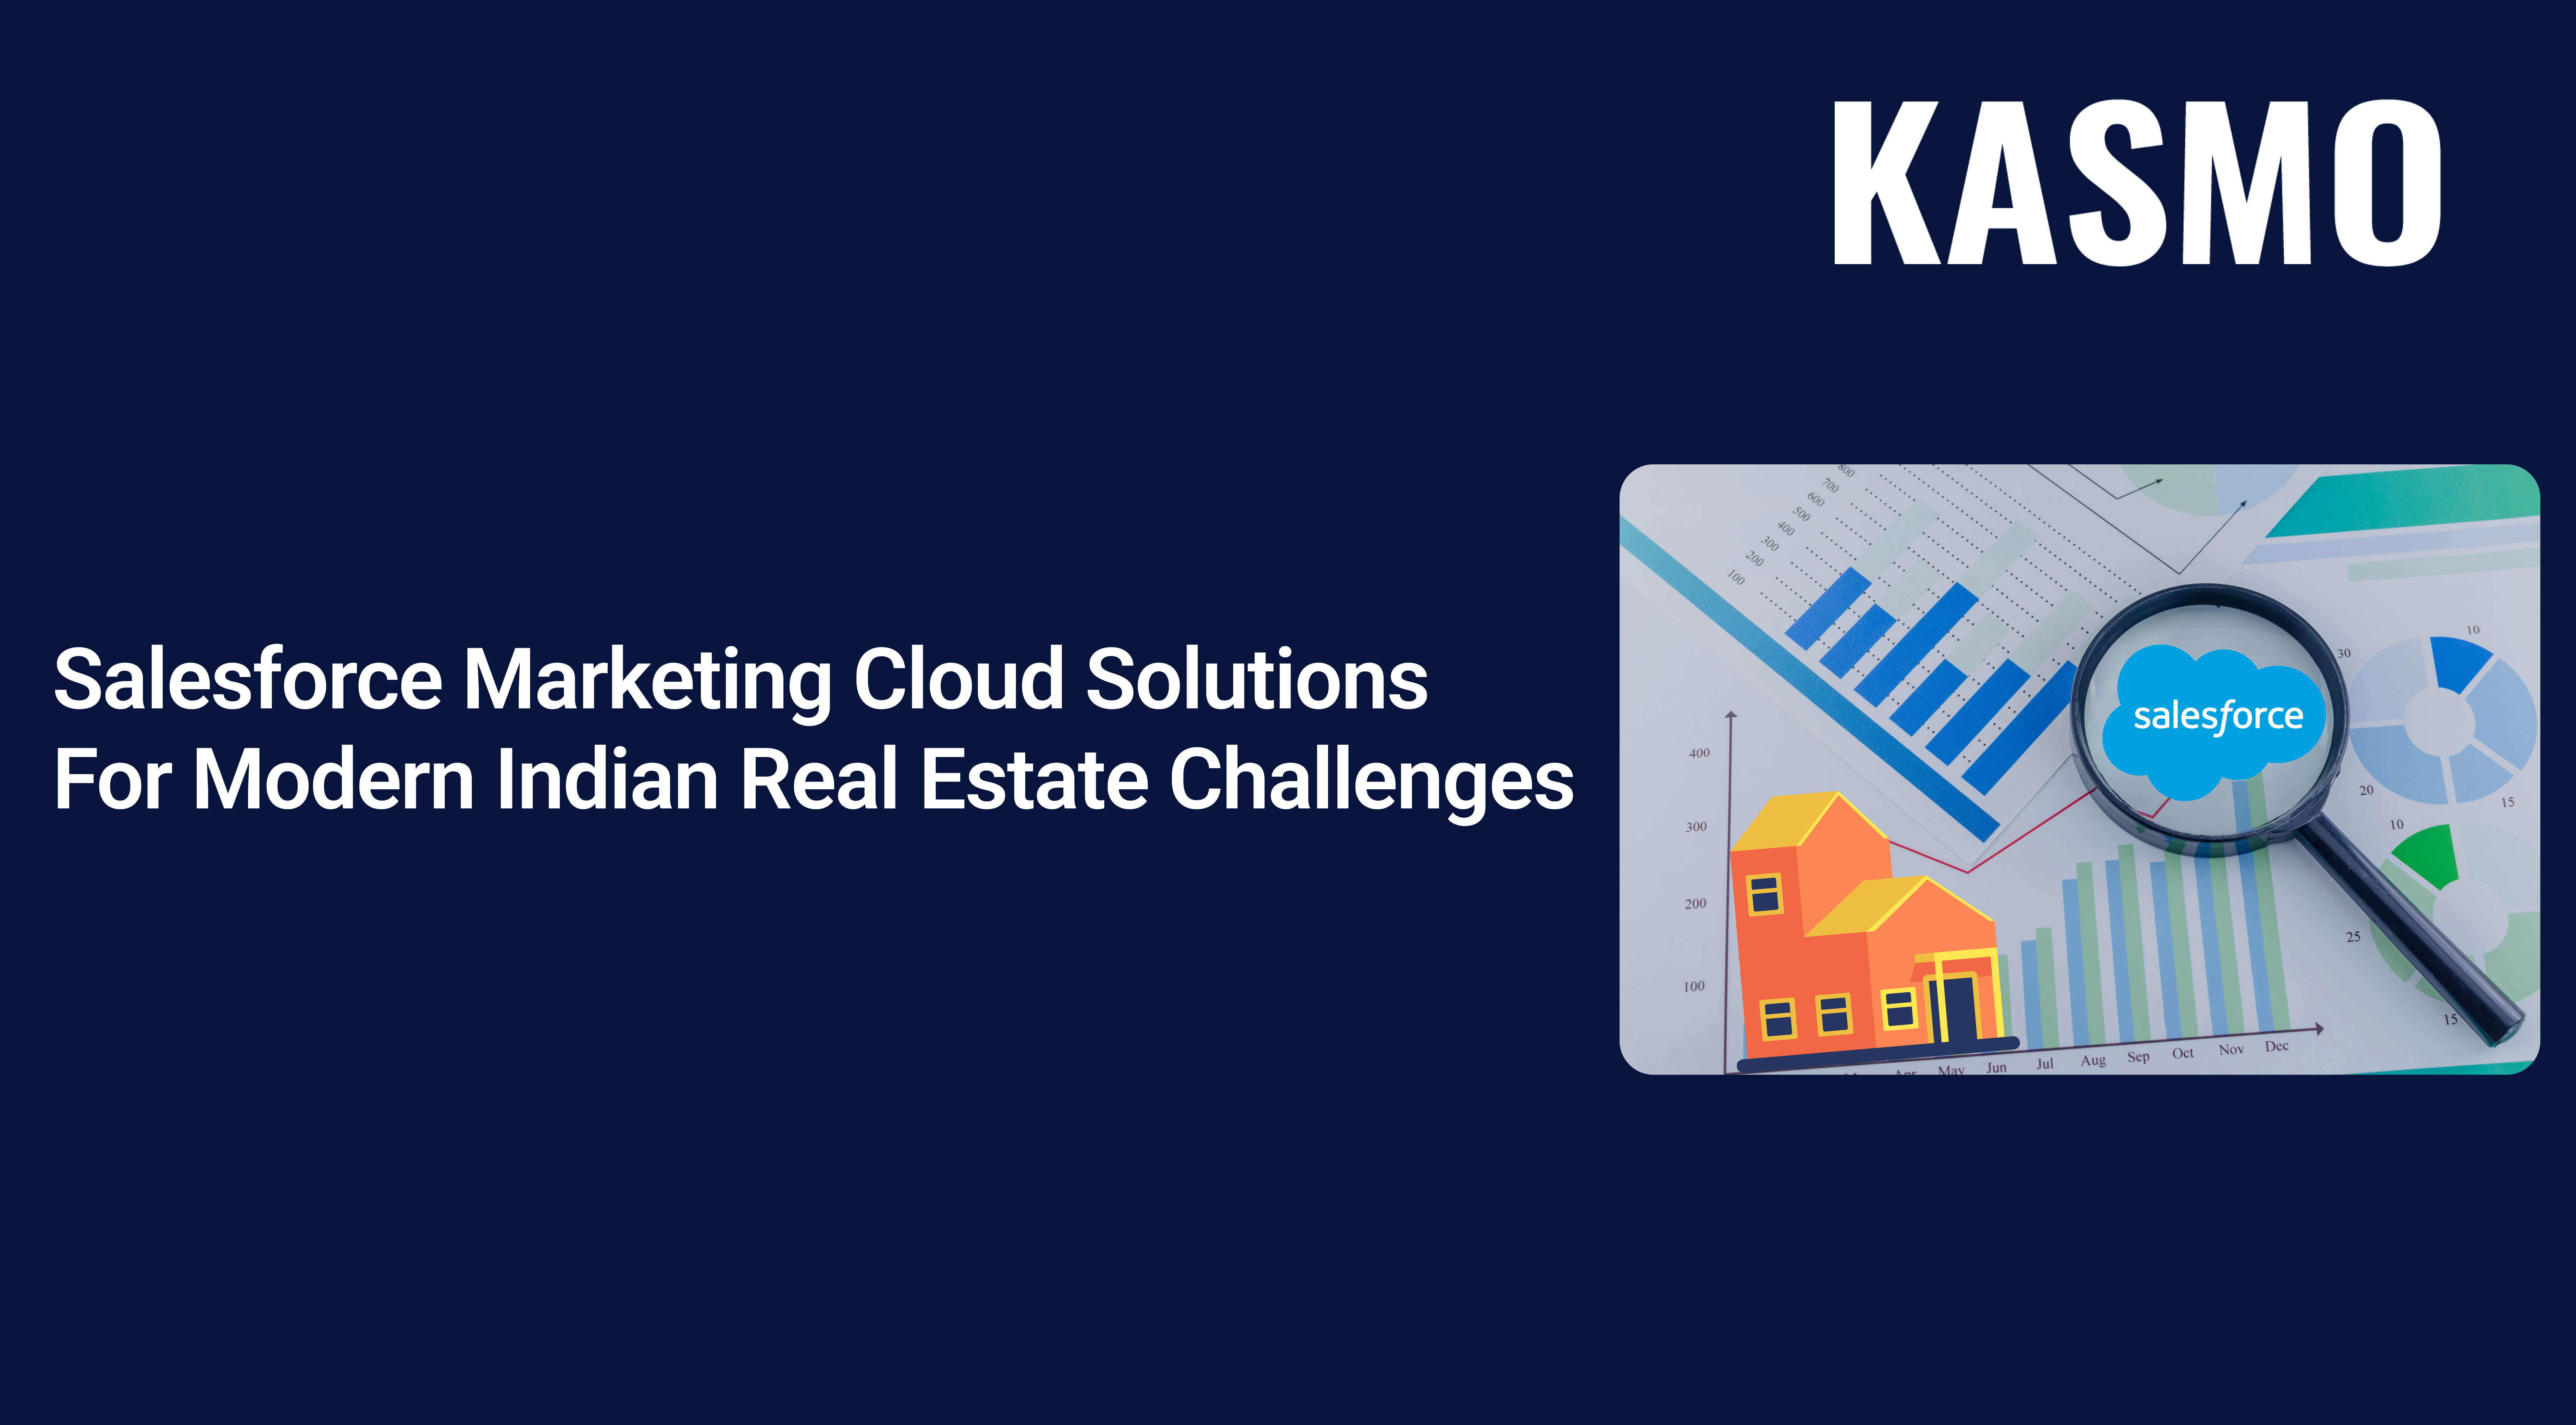 Salesforce Marketing Cloud Solutions For Modern Indian Real Estate Challenges